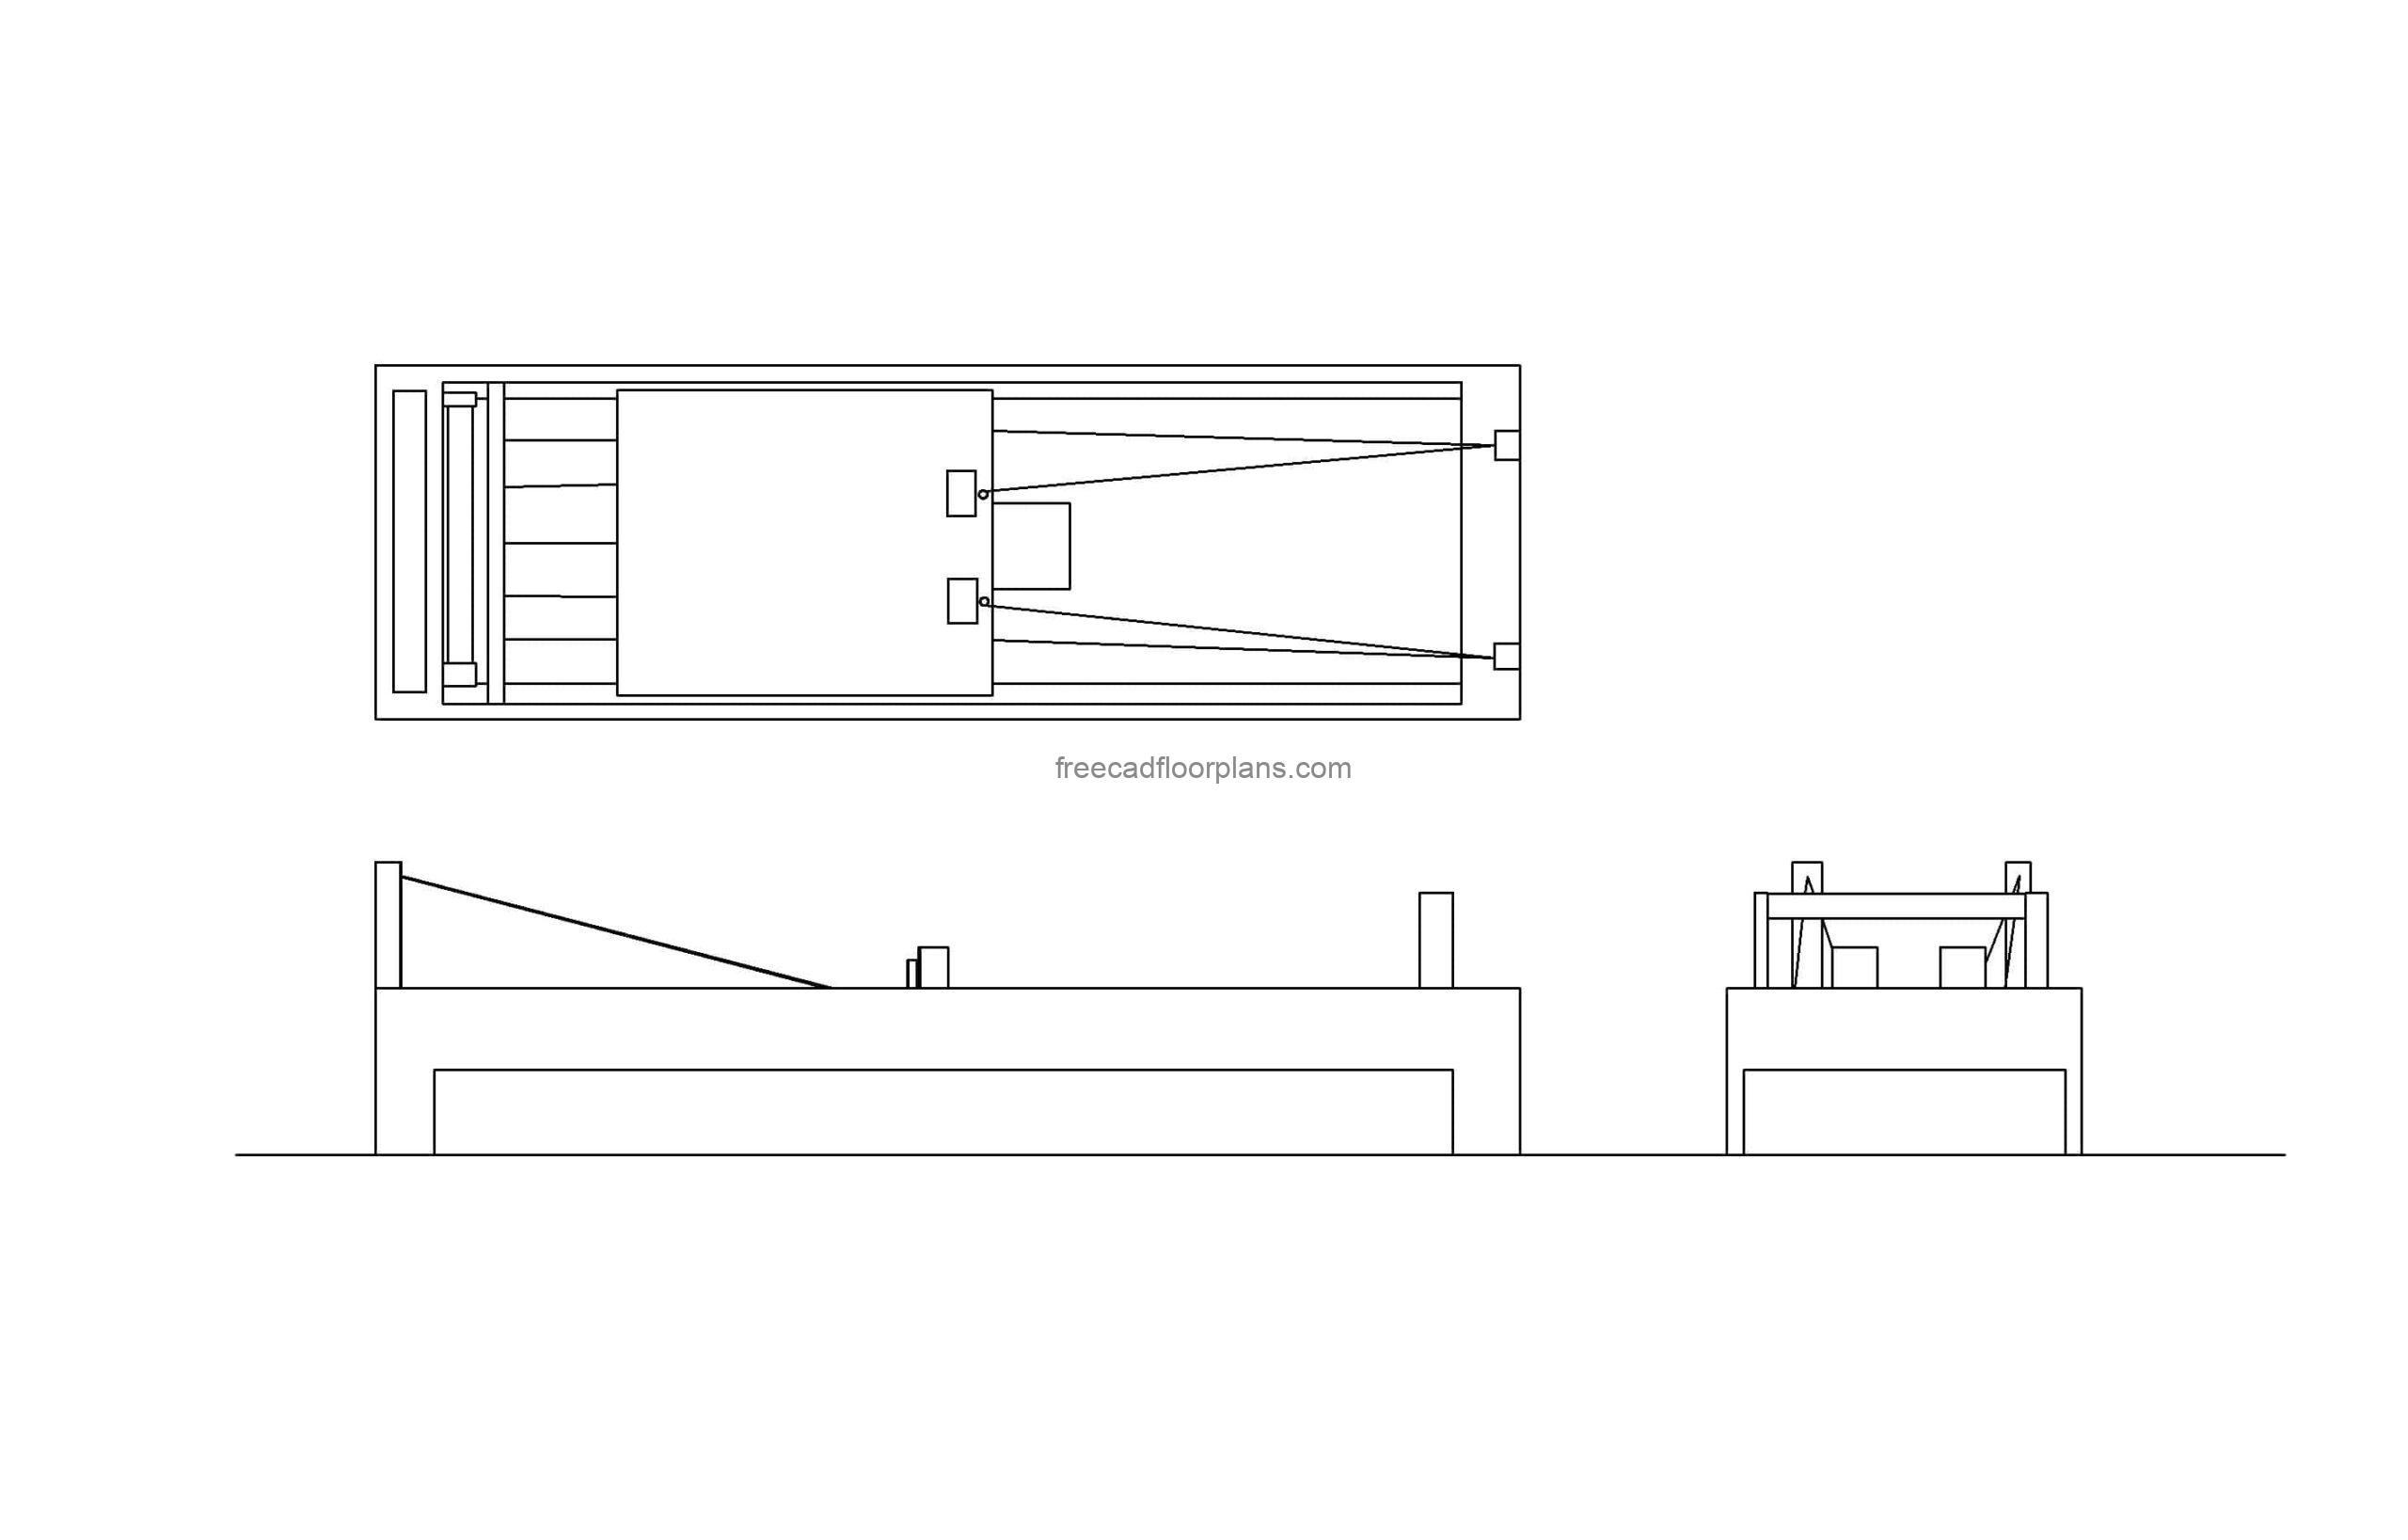 dwg autocad drawing of a pilates reformer, plan and elevation 2d views, dwg file for free download